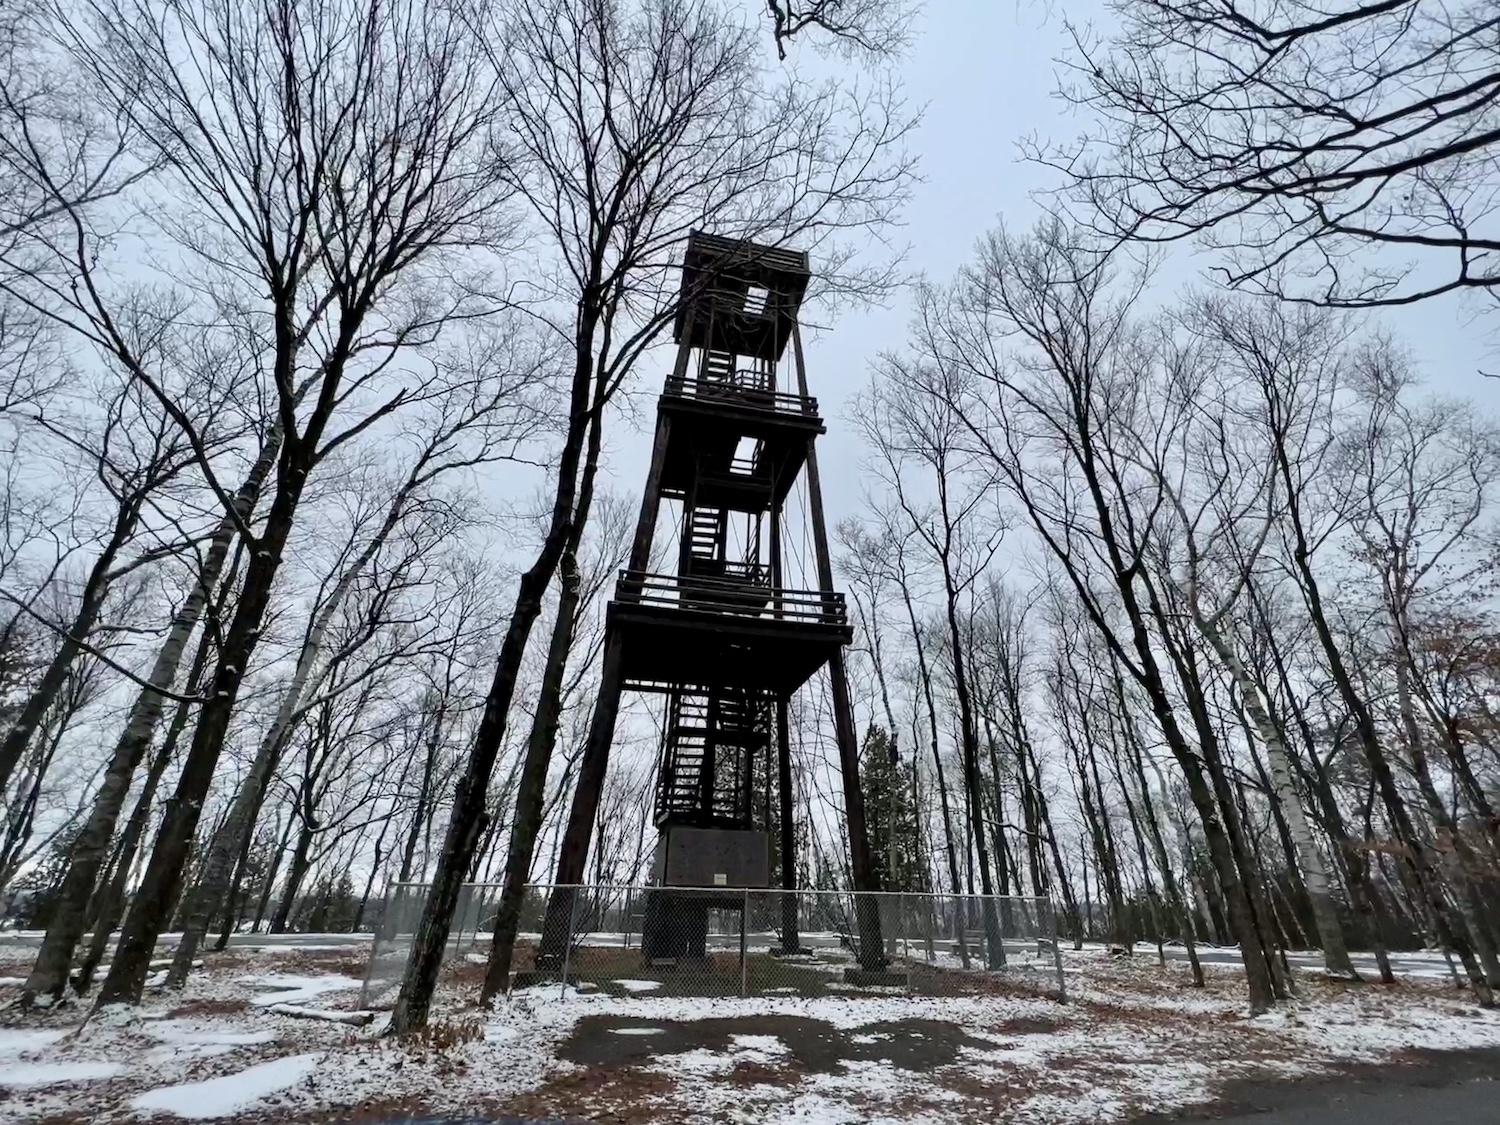 The iconic observation tower in Potawatomi State Park has been deemed unsafe and closed.